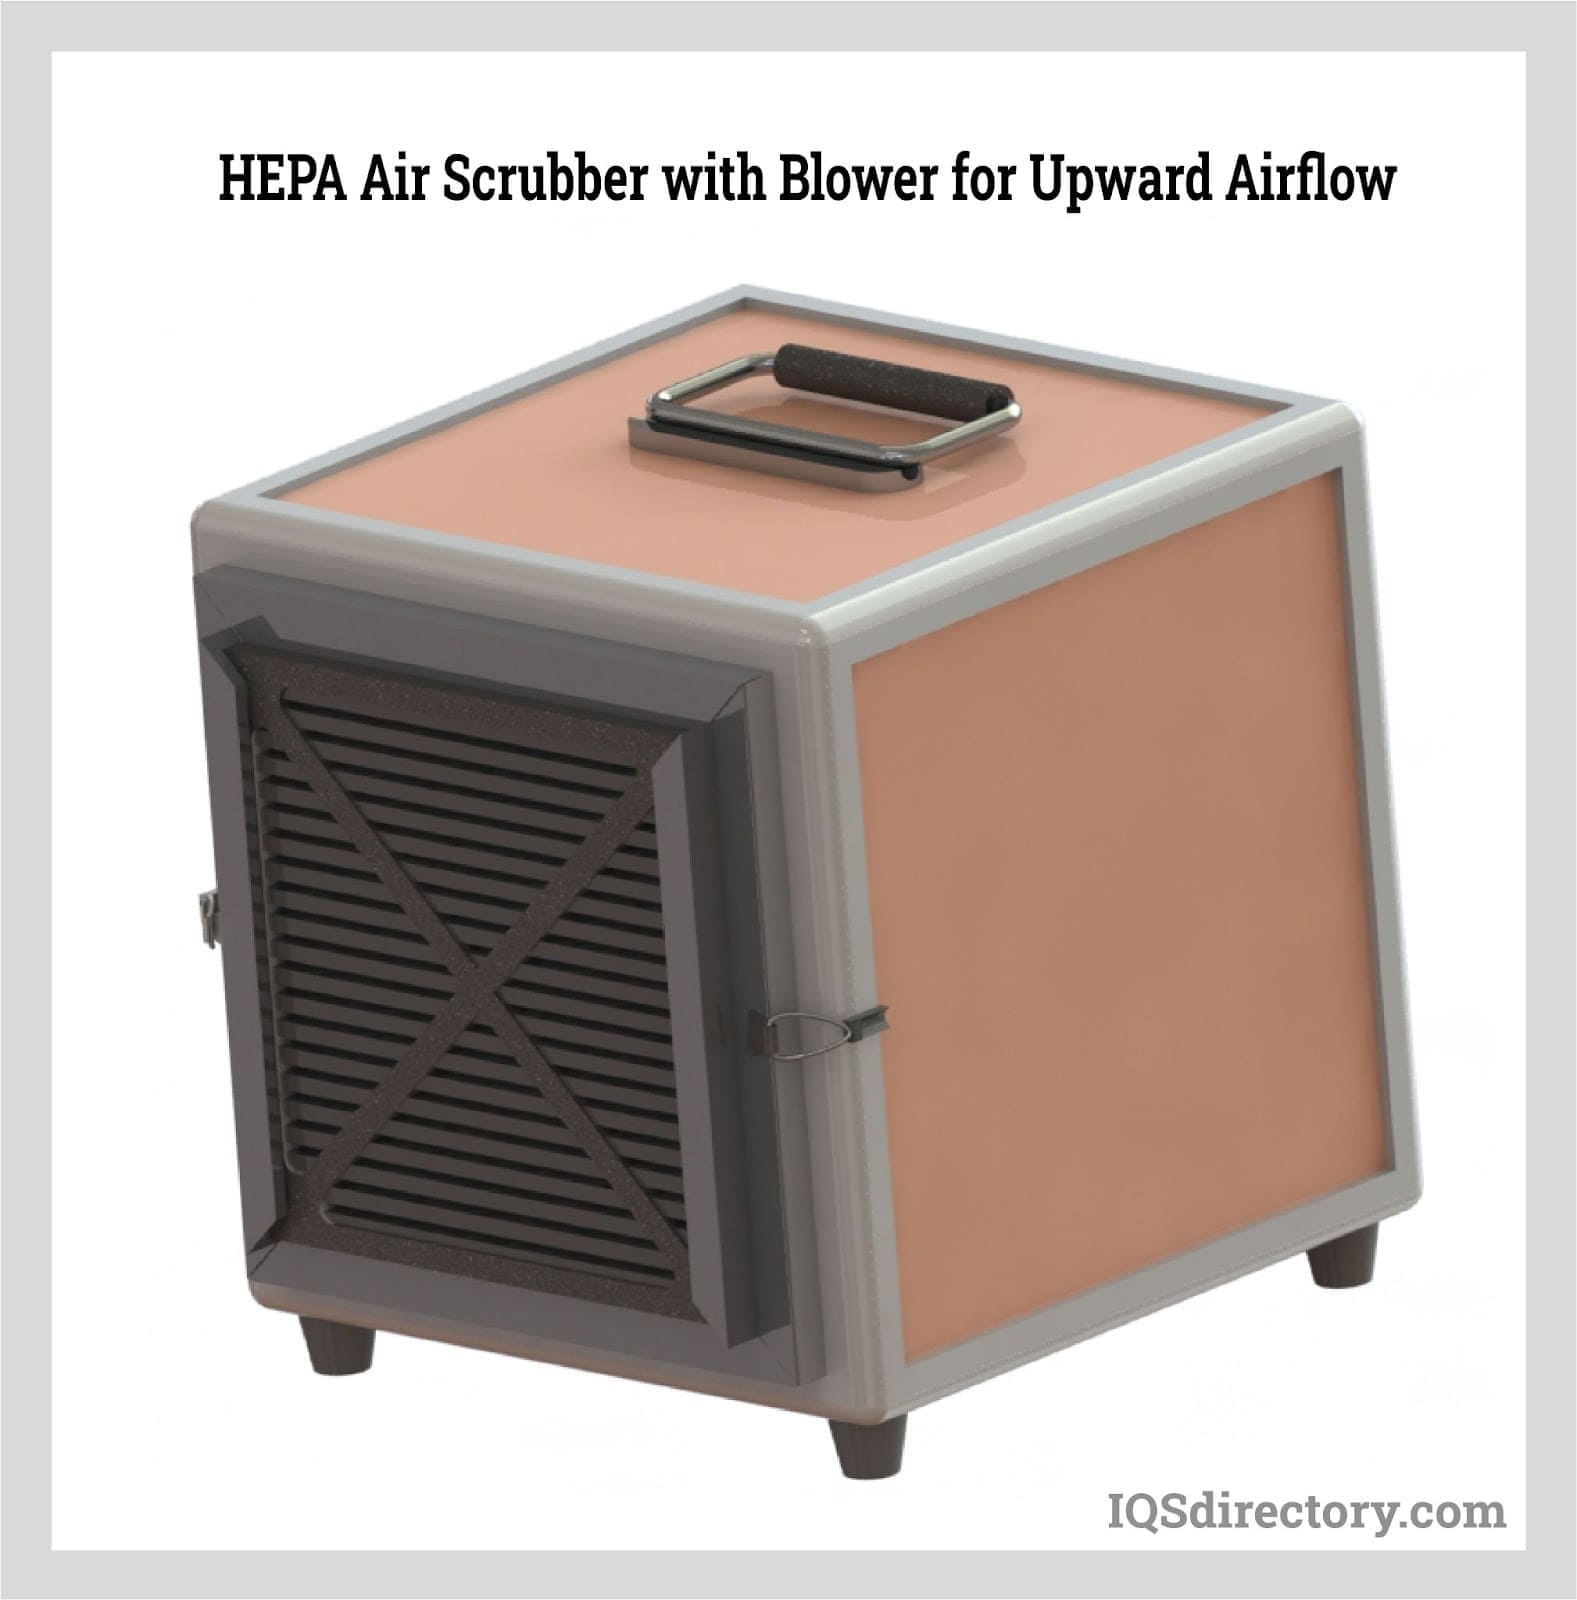 HEPA Air Scrubber with Blower for Upward Airflow